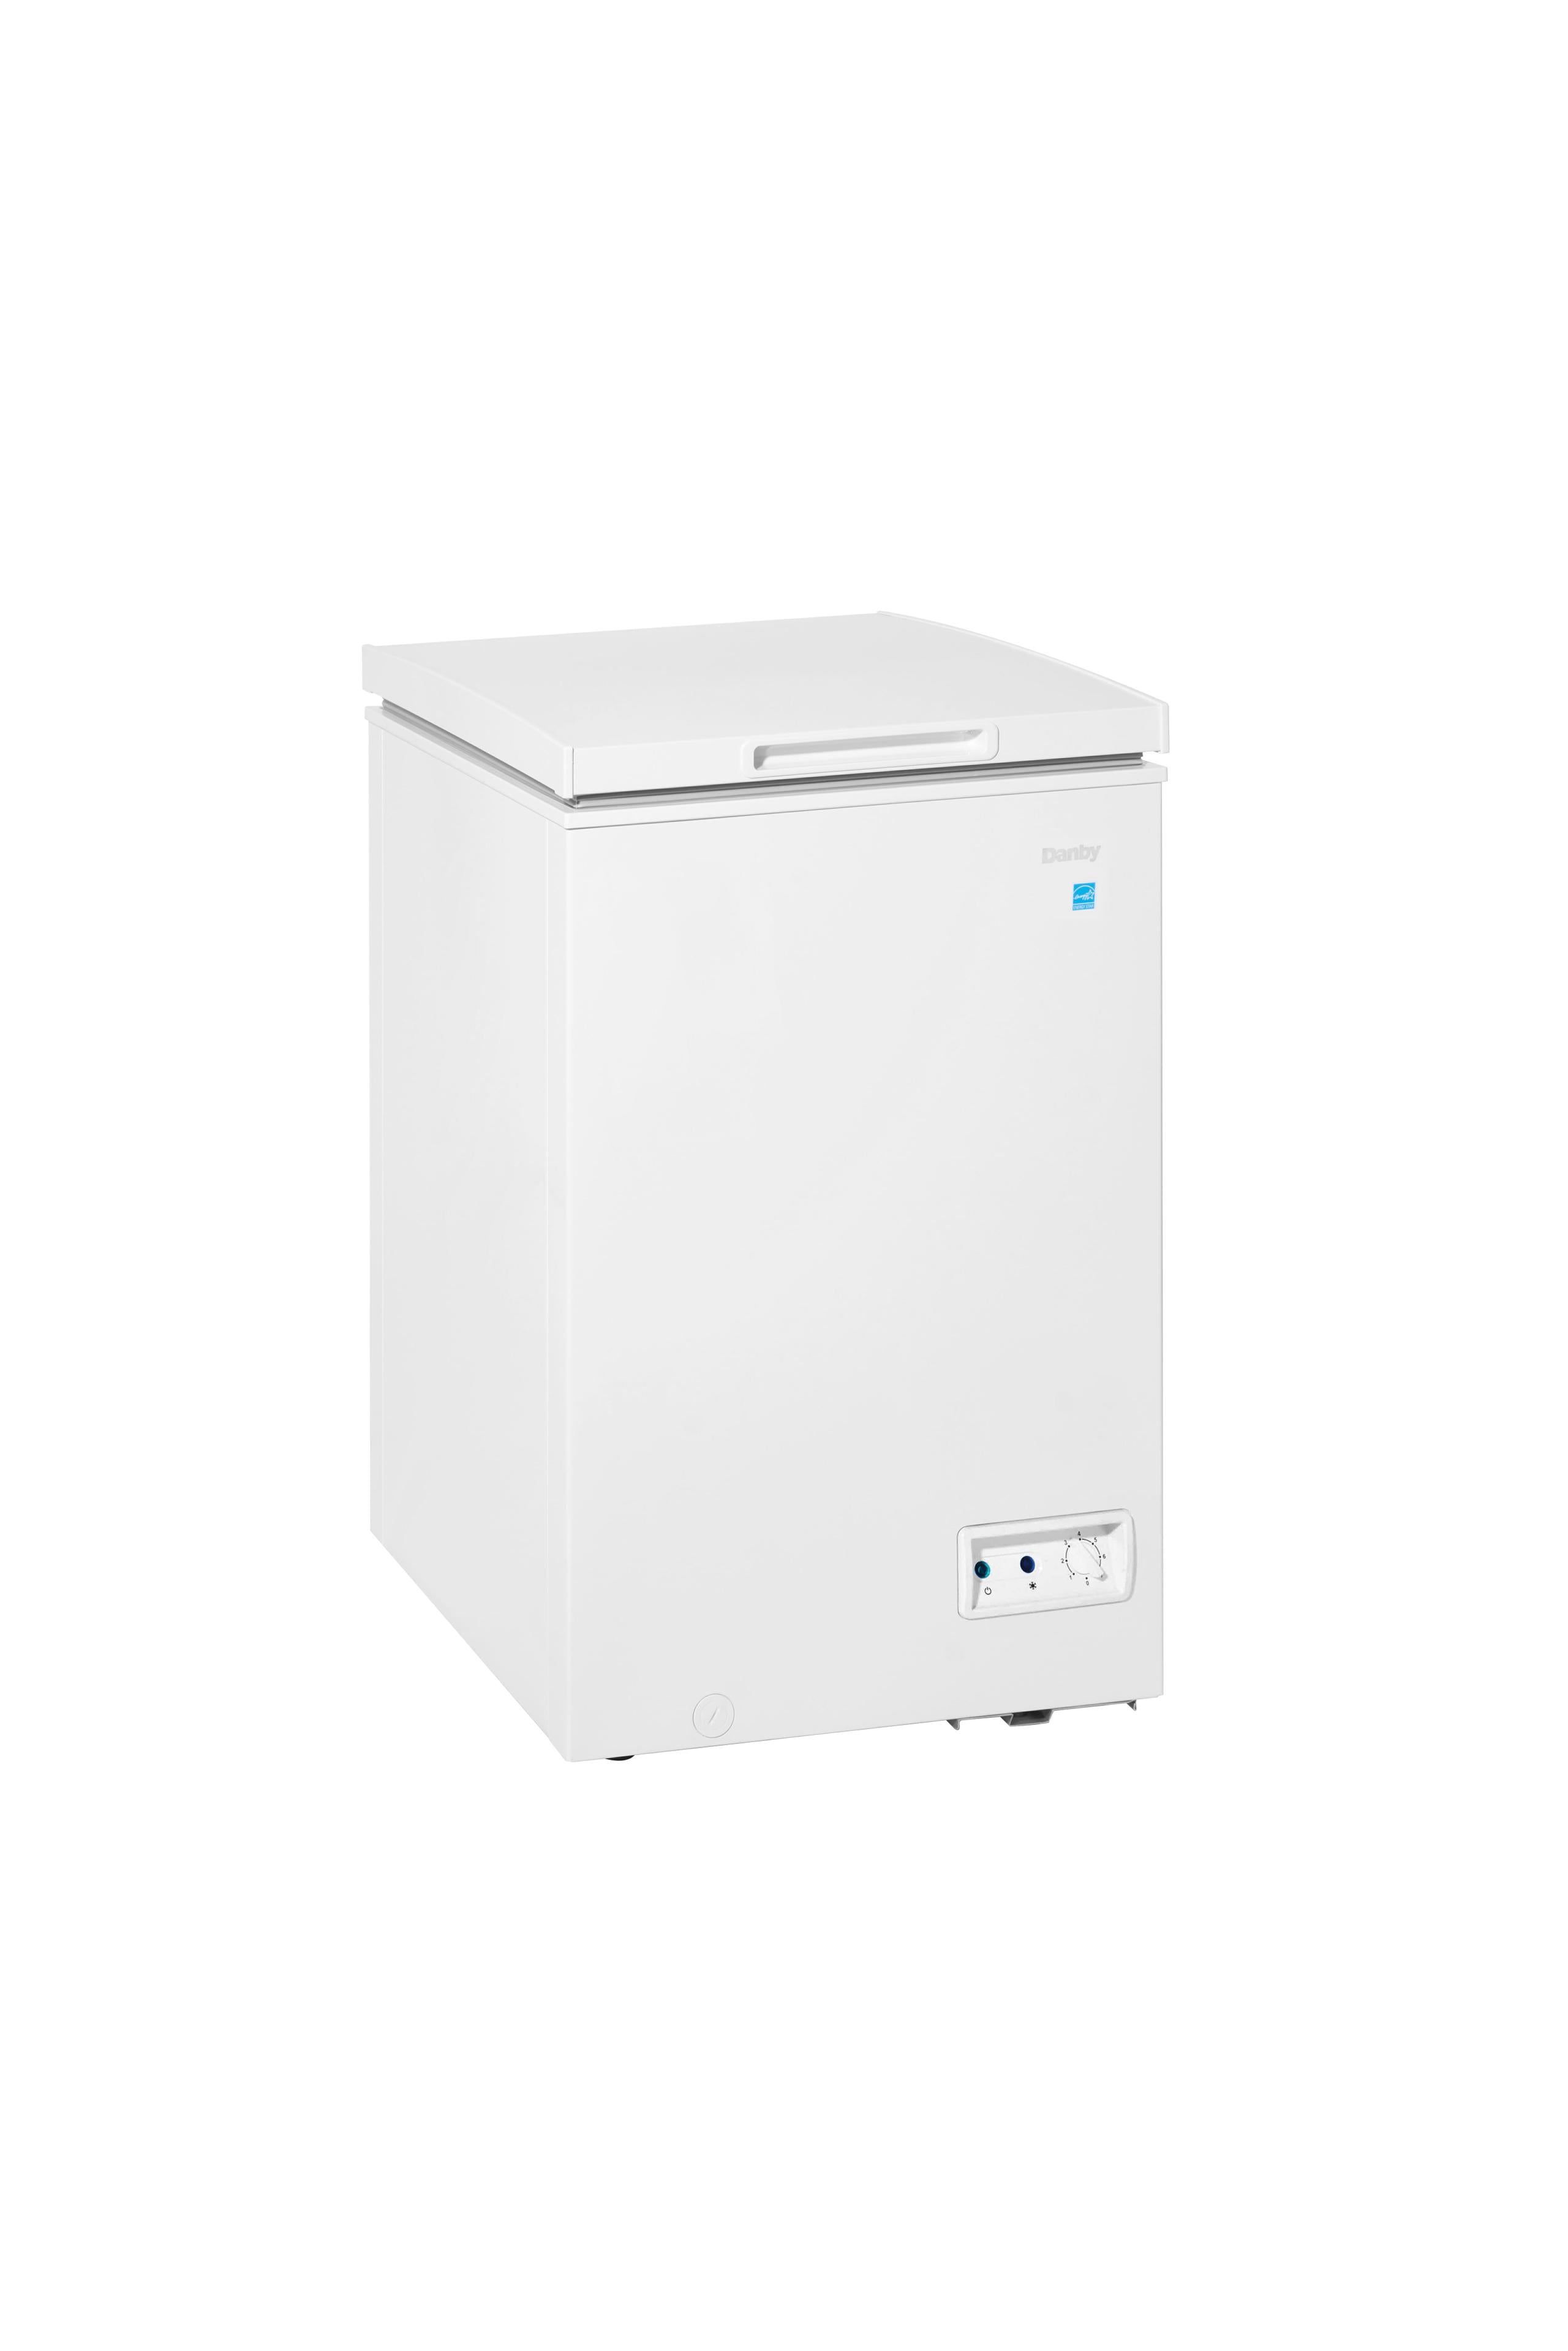 Danby 3.5 cu. ft. Chest Freezer in White